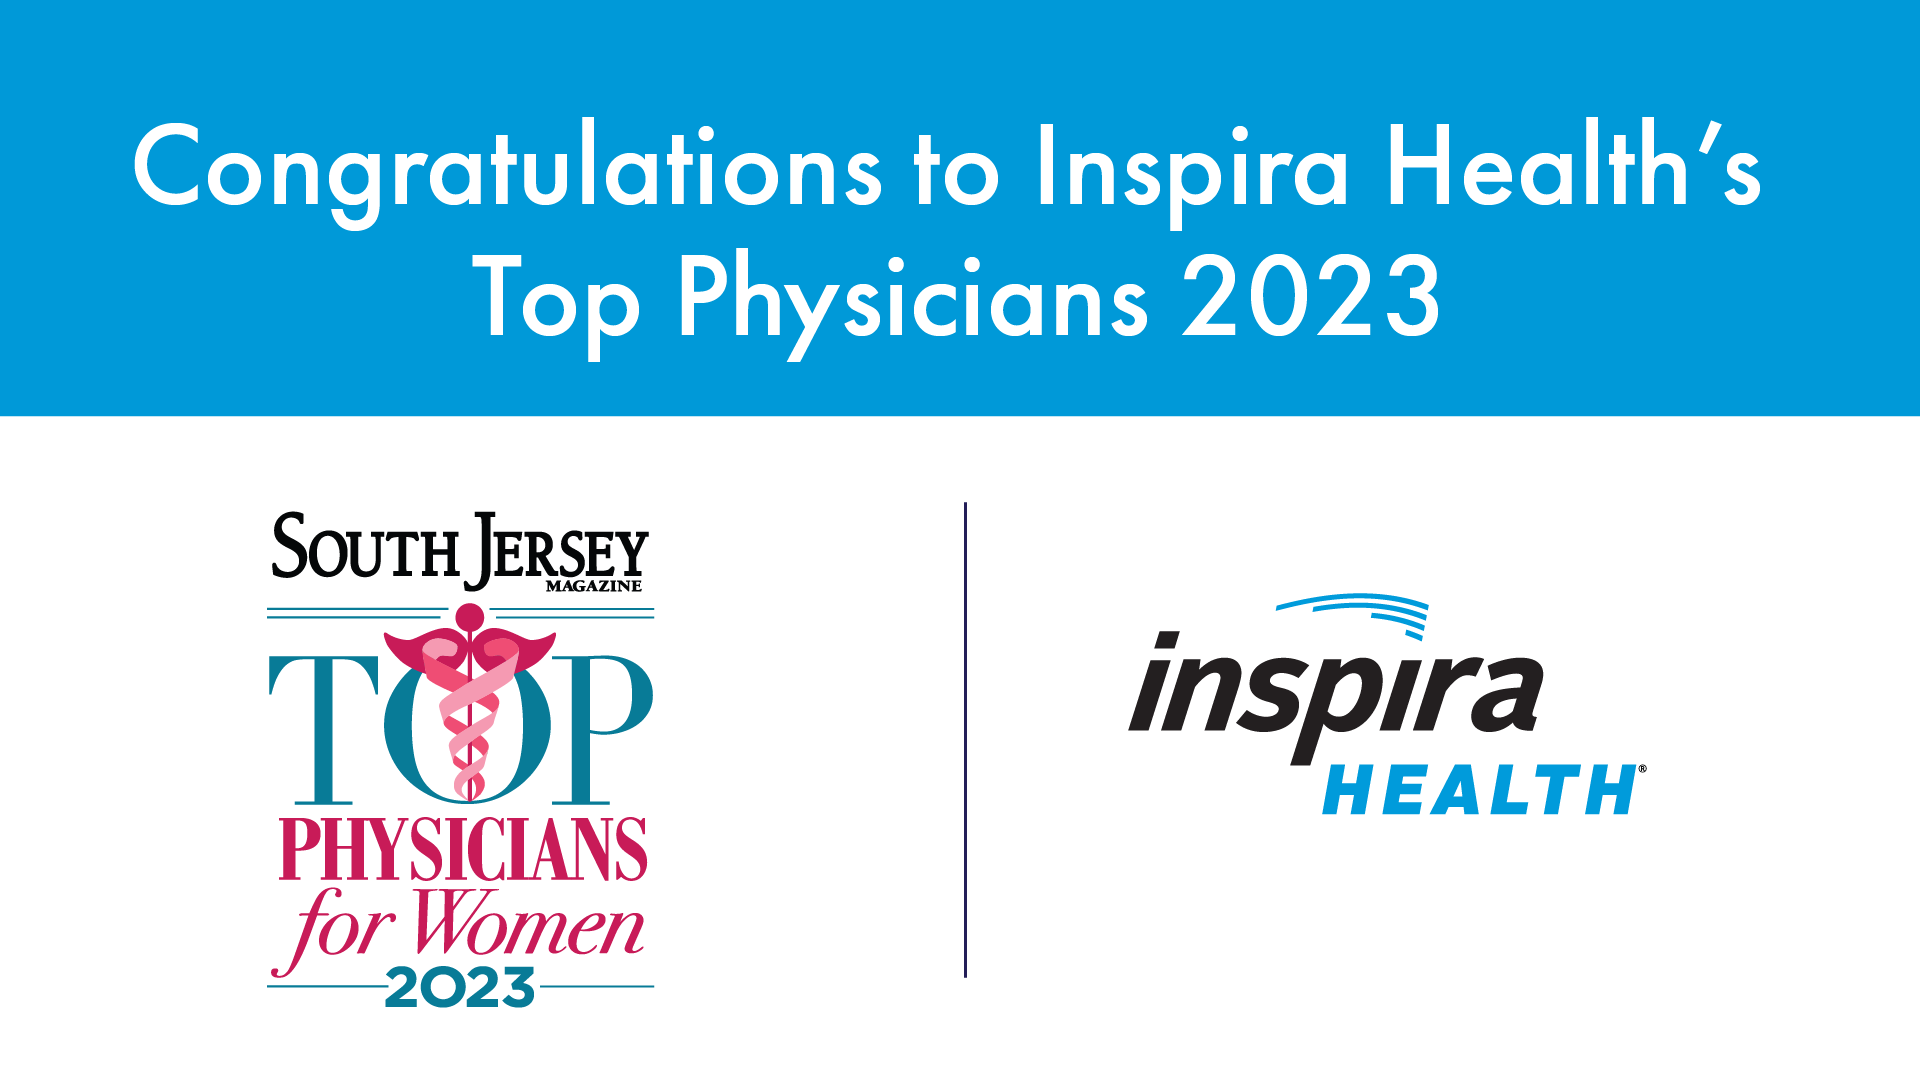 South Jersey Magazine Top Physicians for Women 2023 Inspira Health